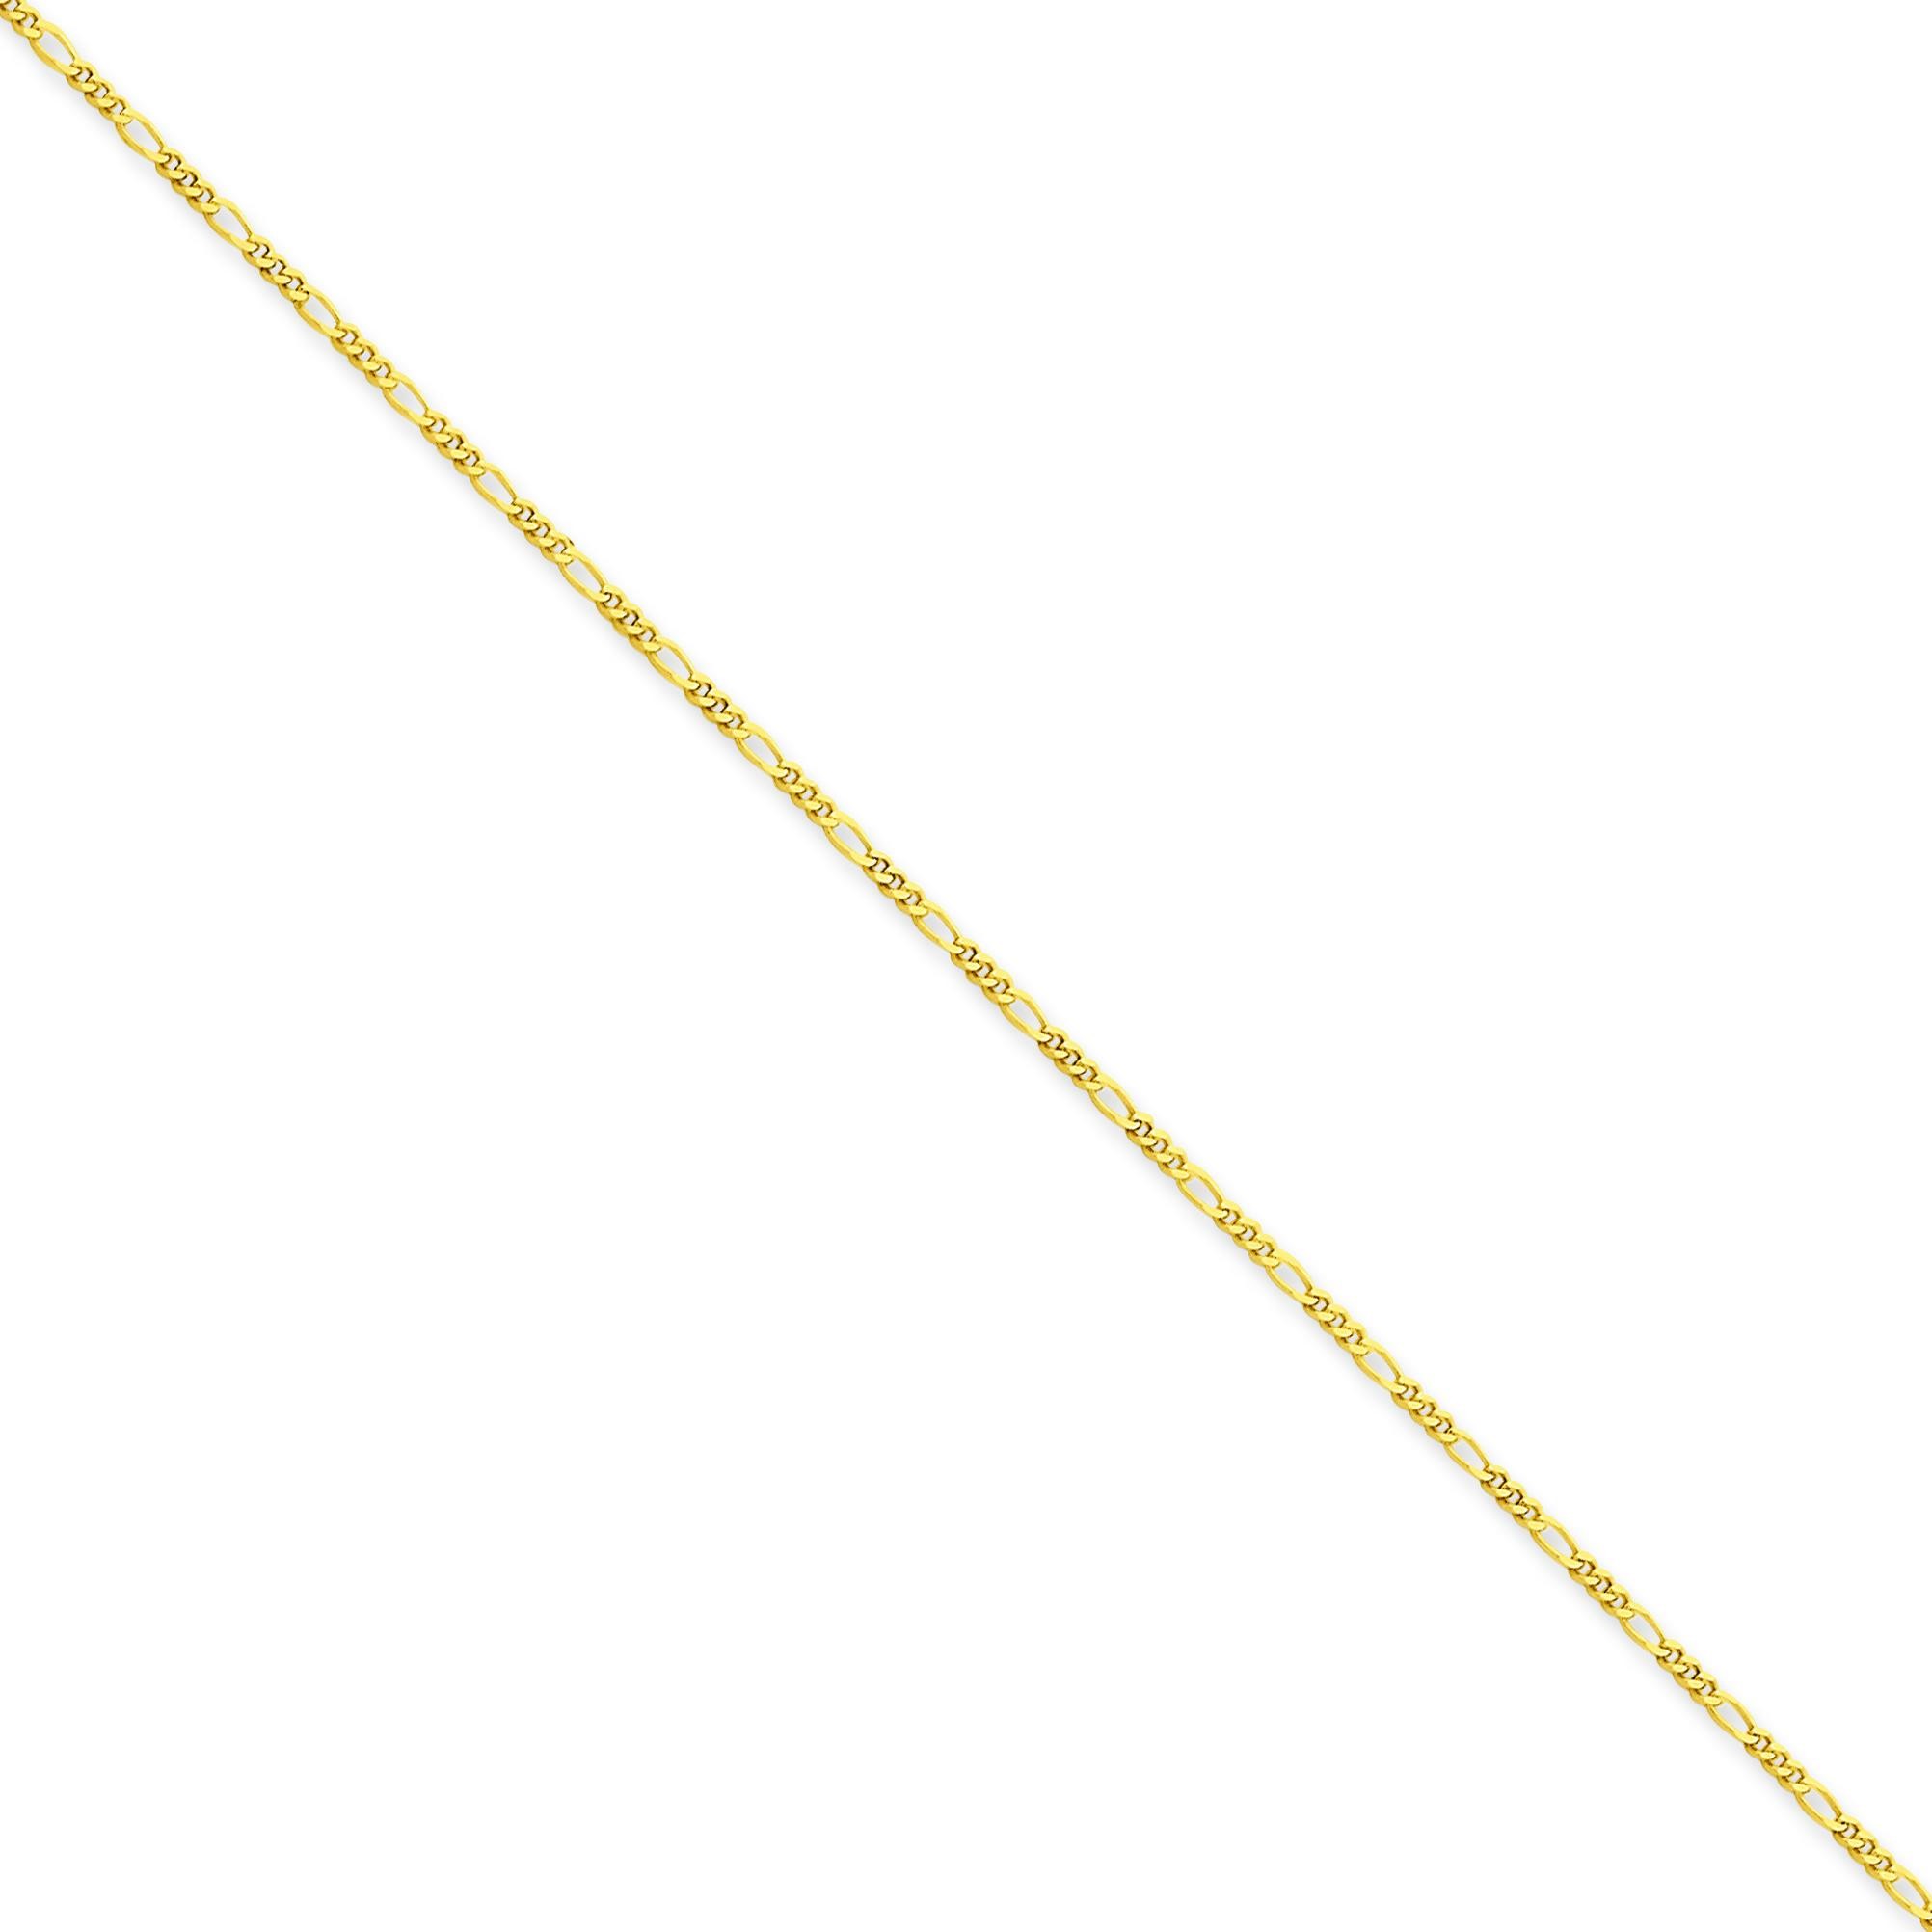 14k Yellow Gold 24 inch 1.25 mm Flat Figaro Chain Necklace